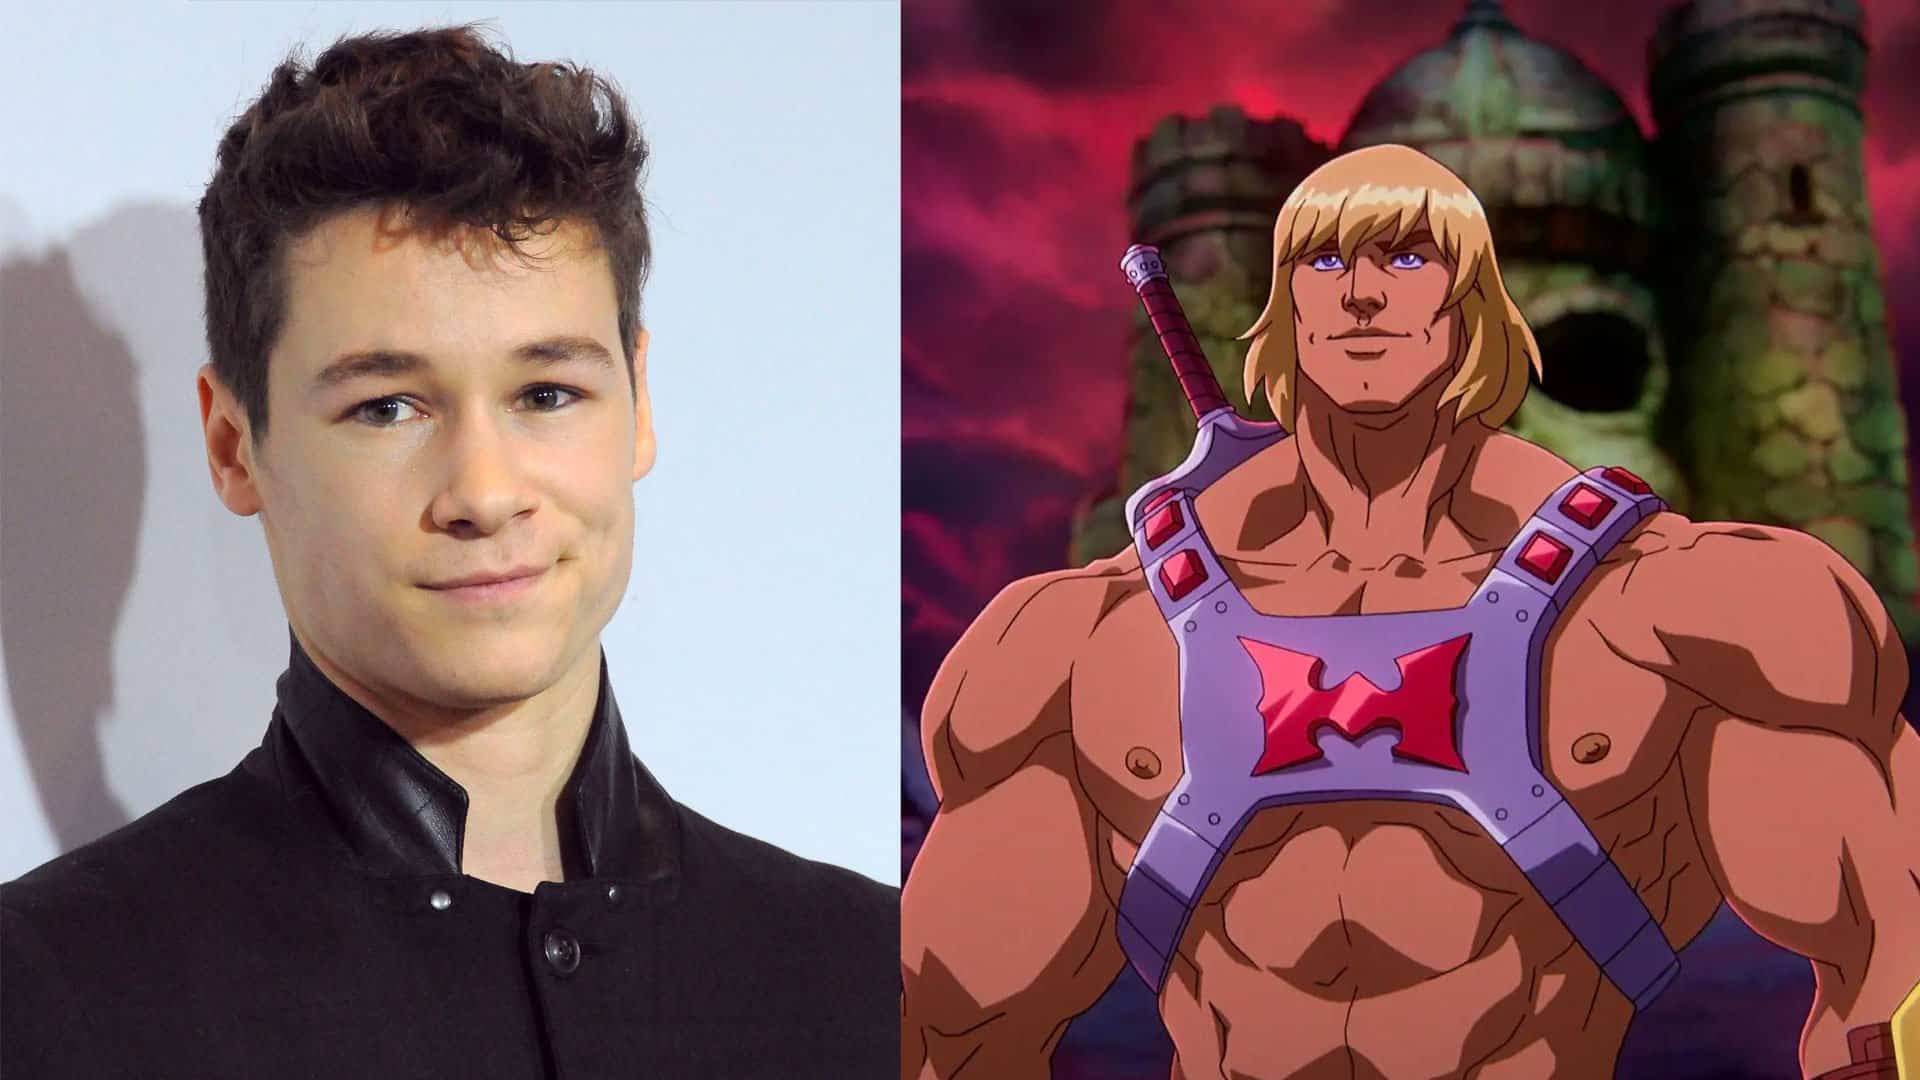 Kyle Allen to Play He-Man in Masters of the Universe From Netflix